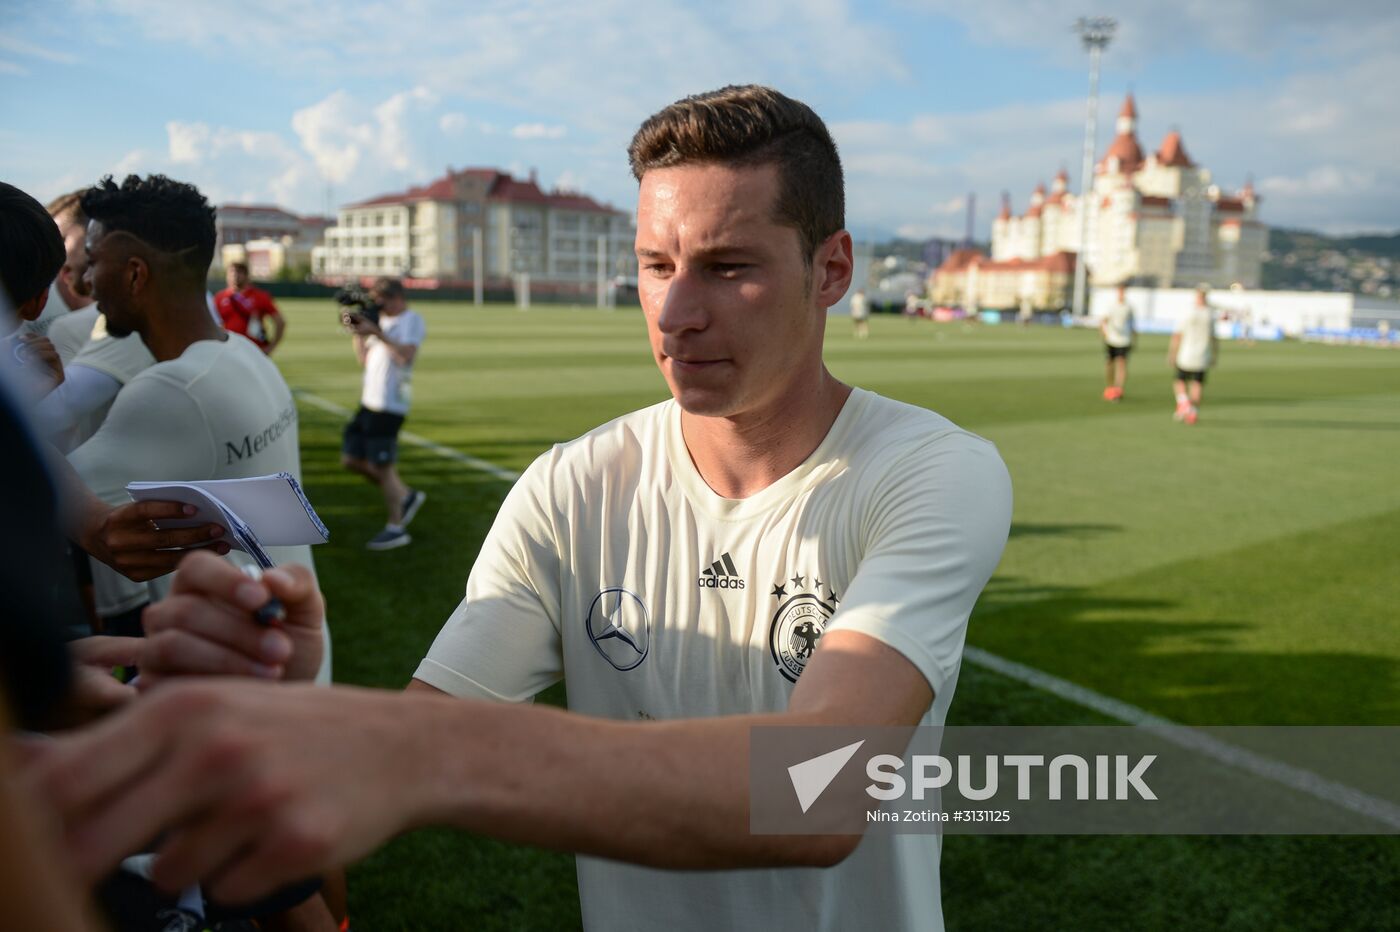 2017 FIFA Confederations Cup. Germany's team holds training session